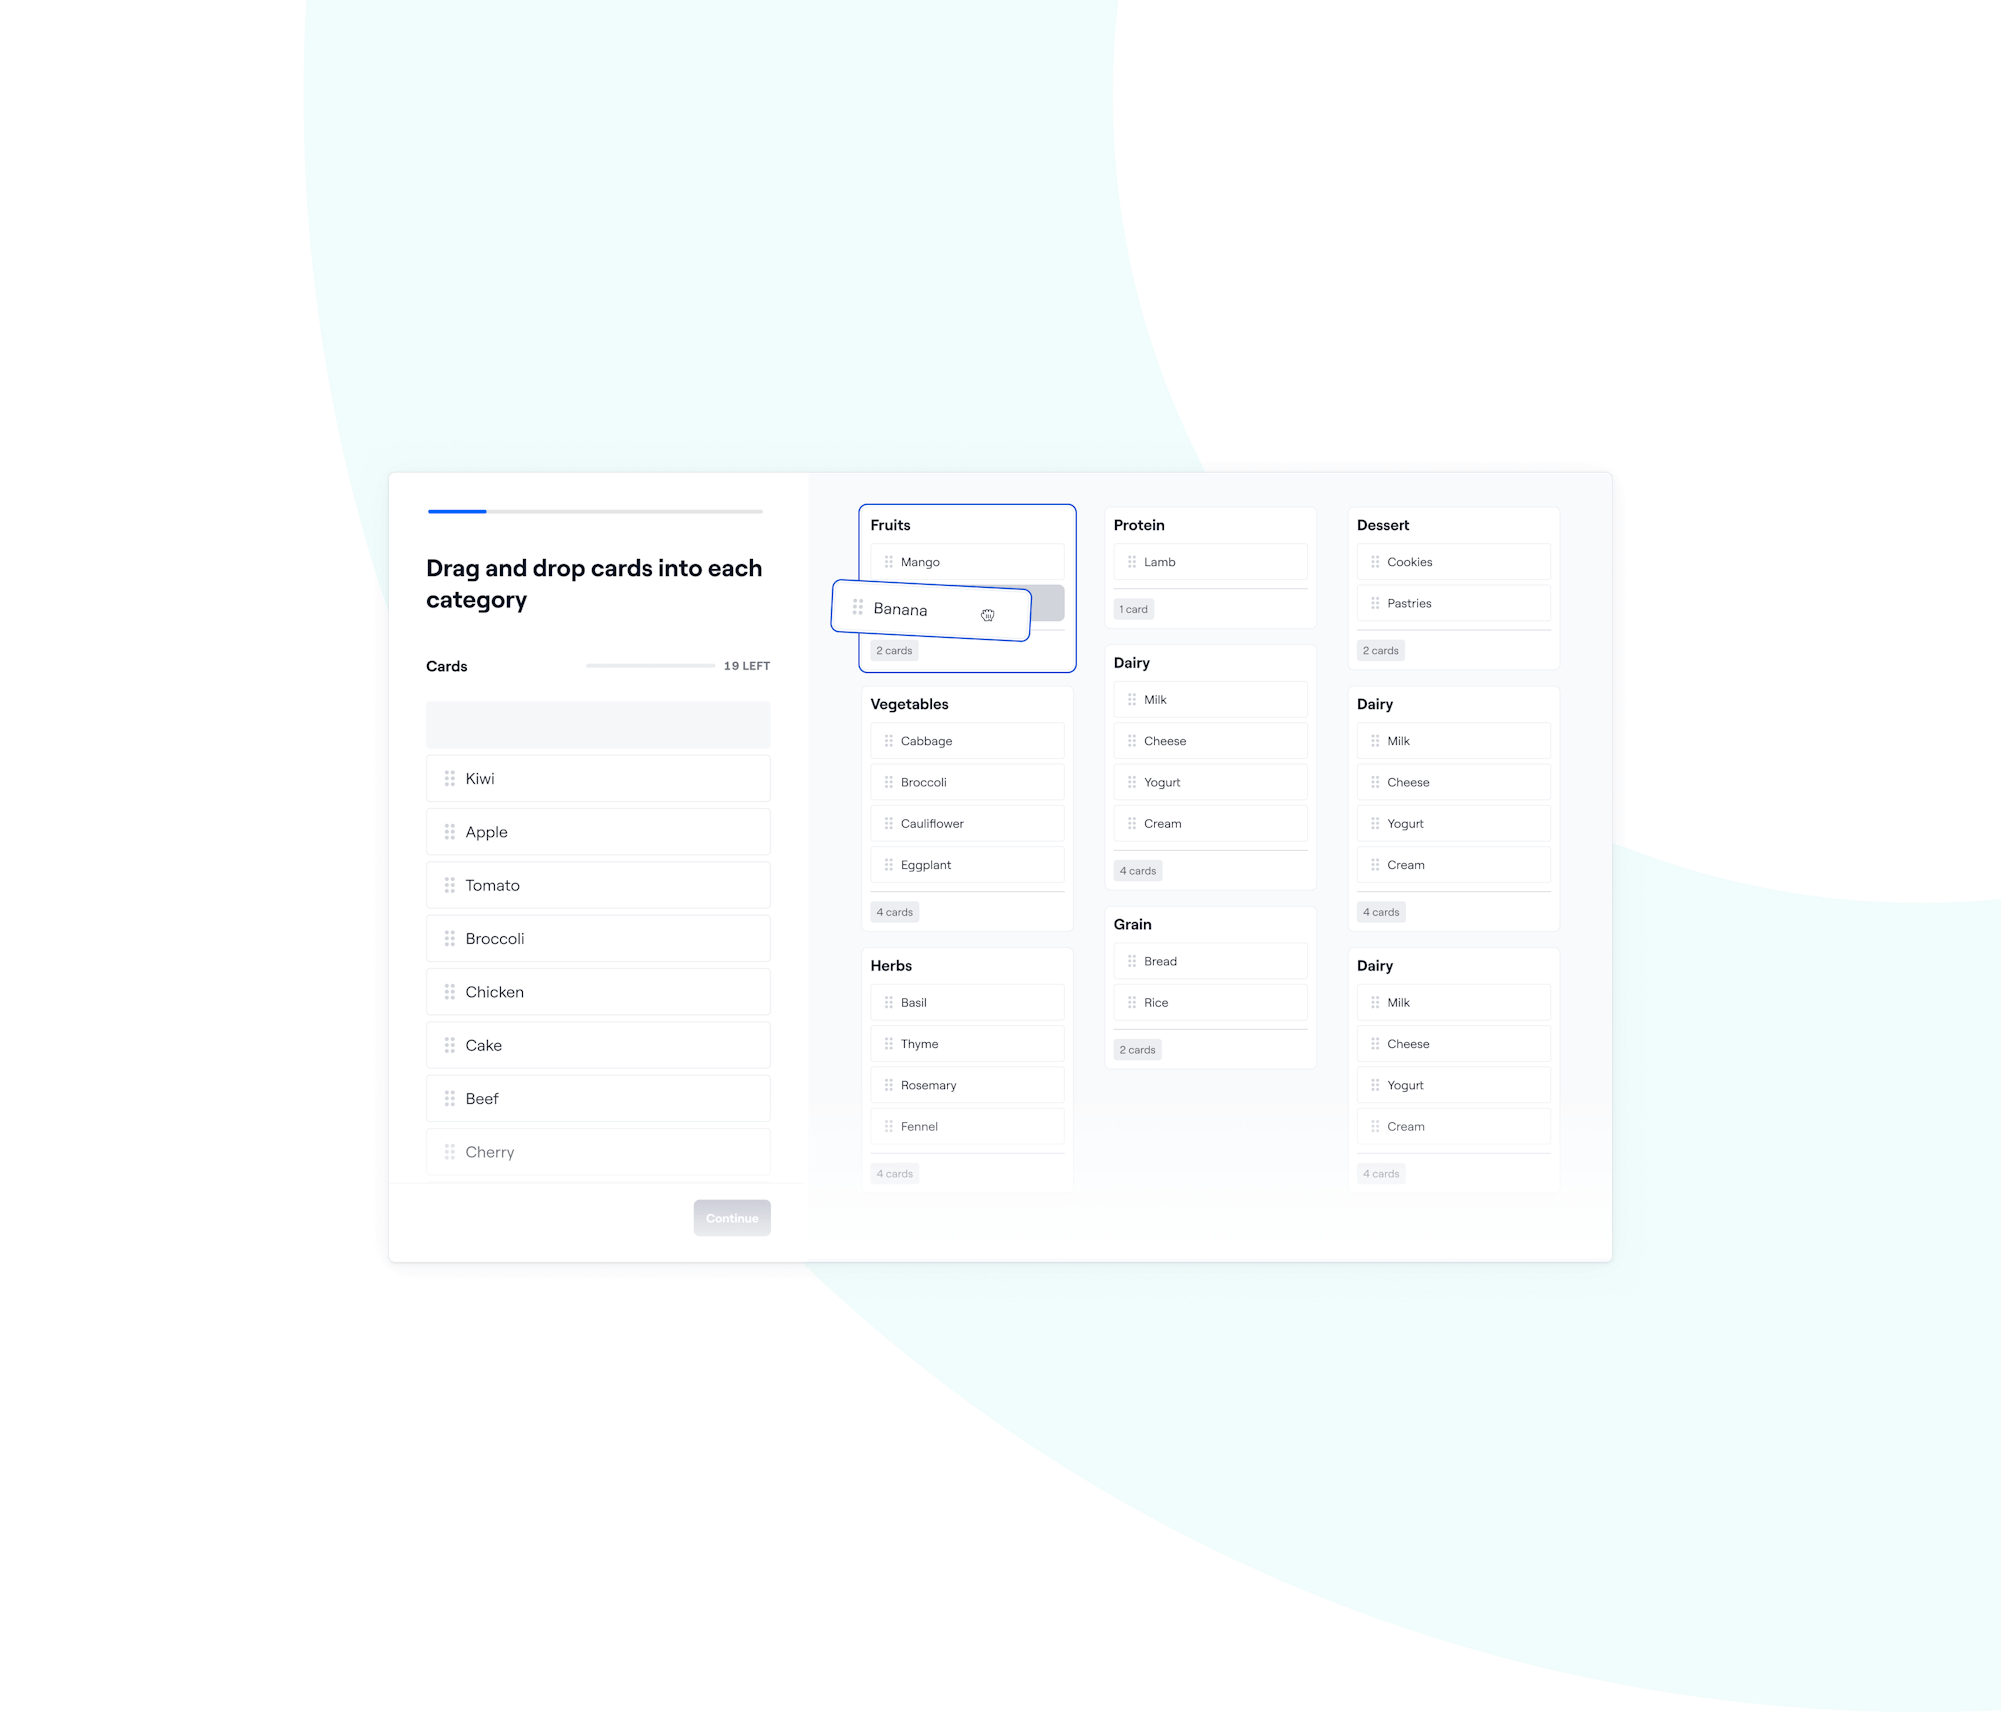 Organize information as your users would